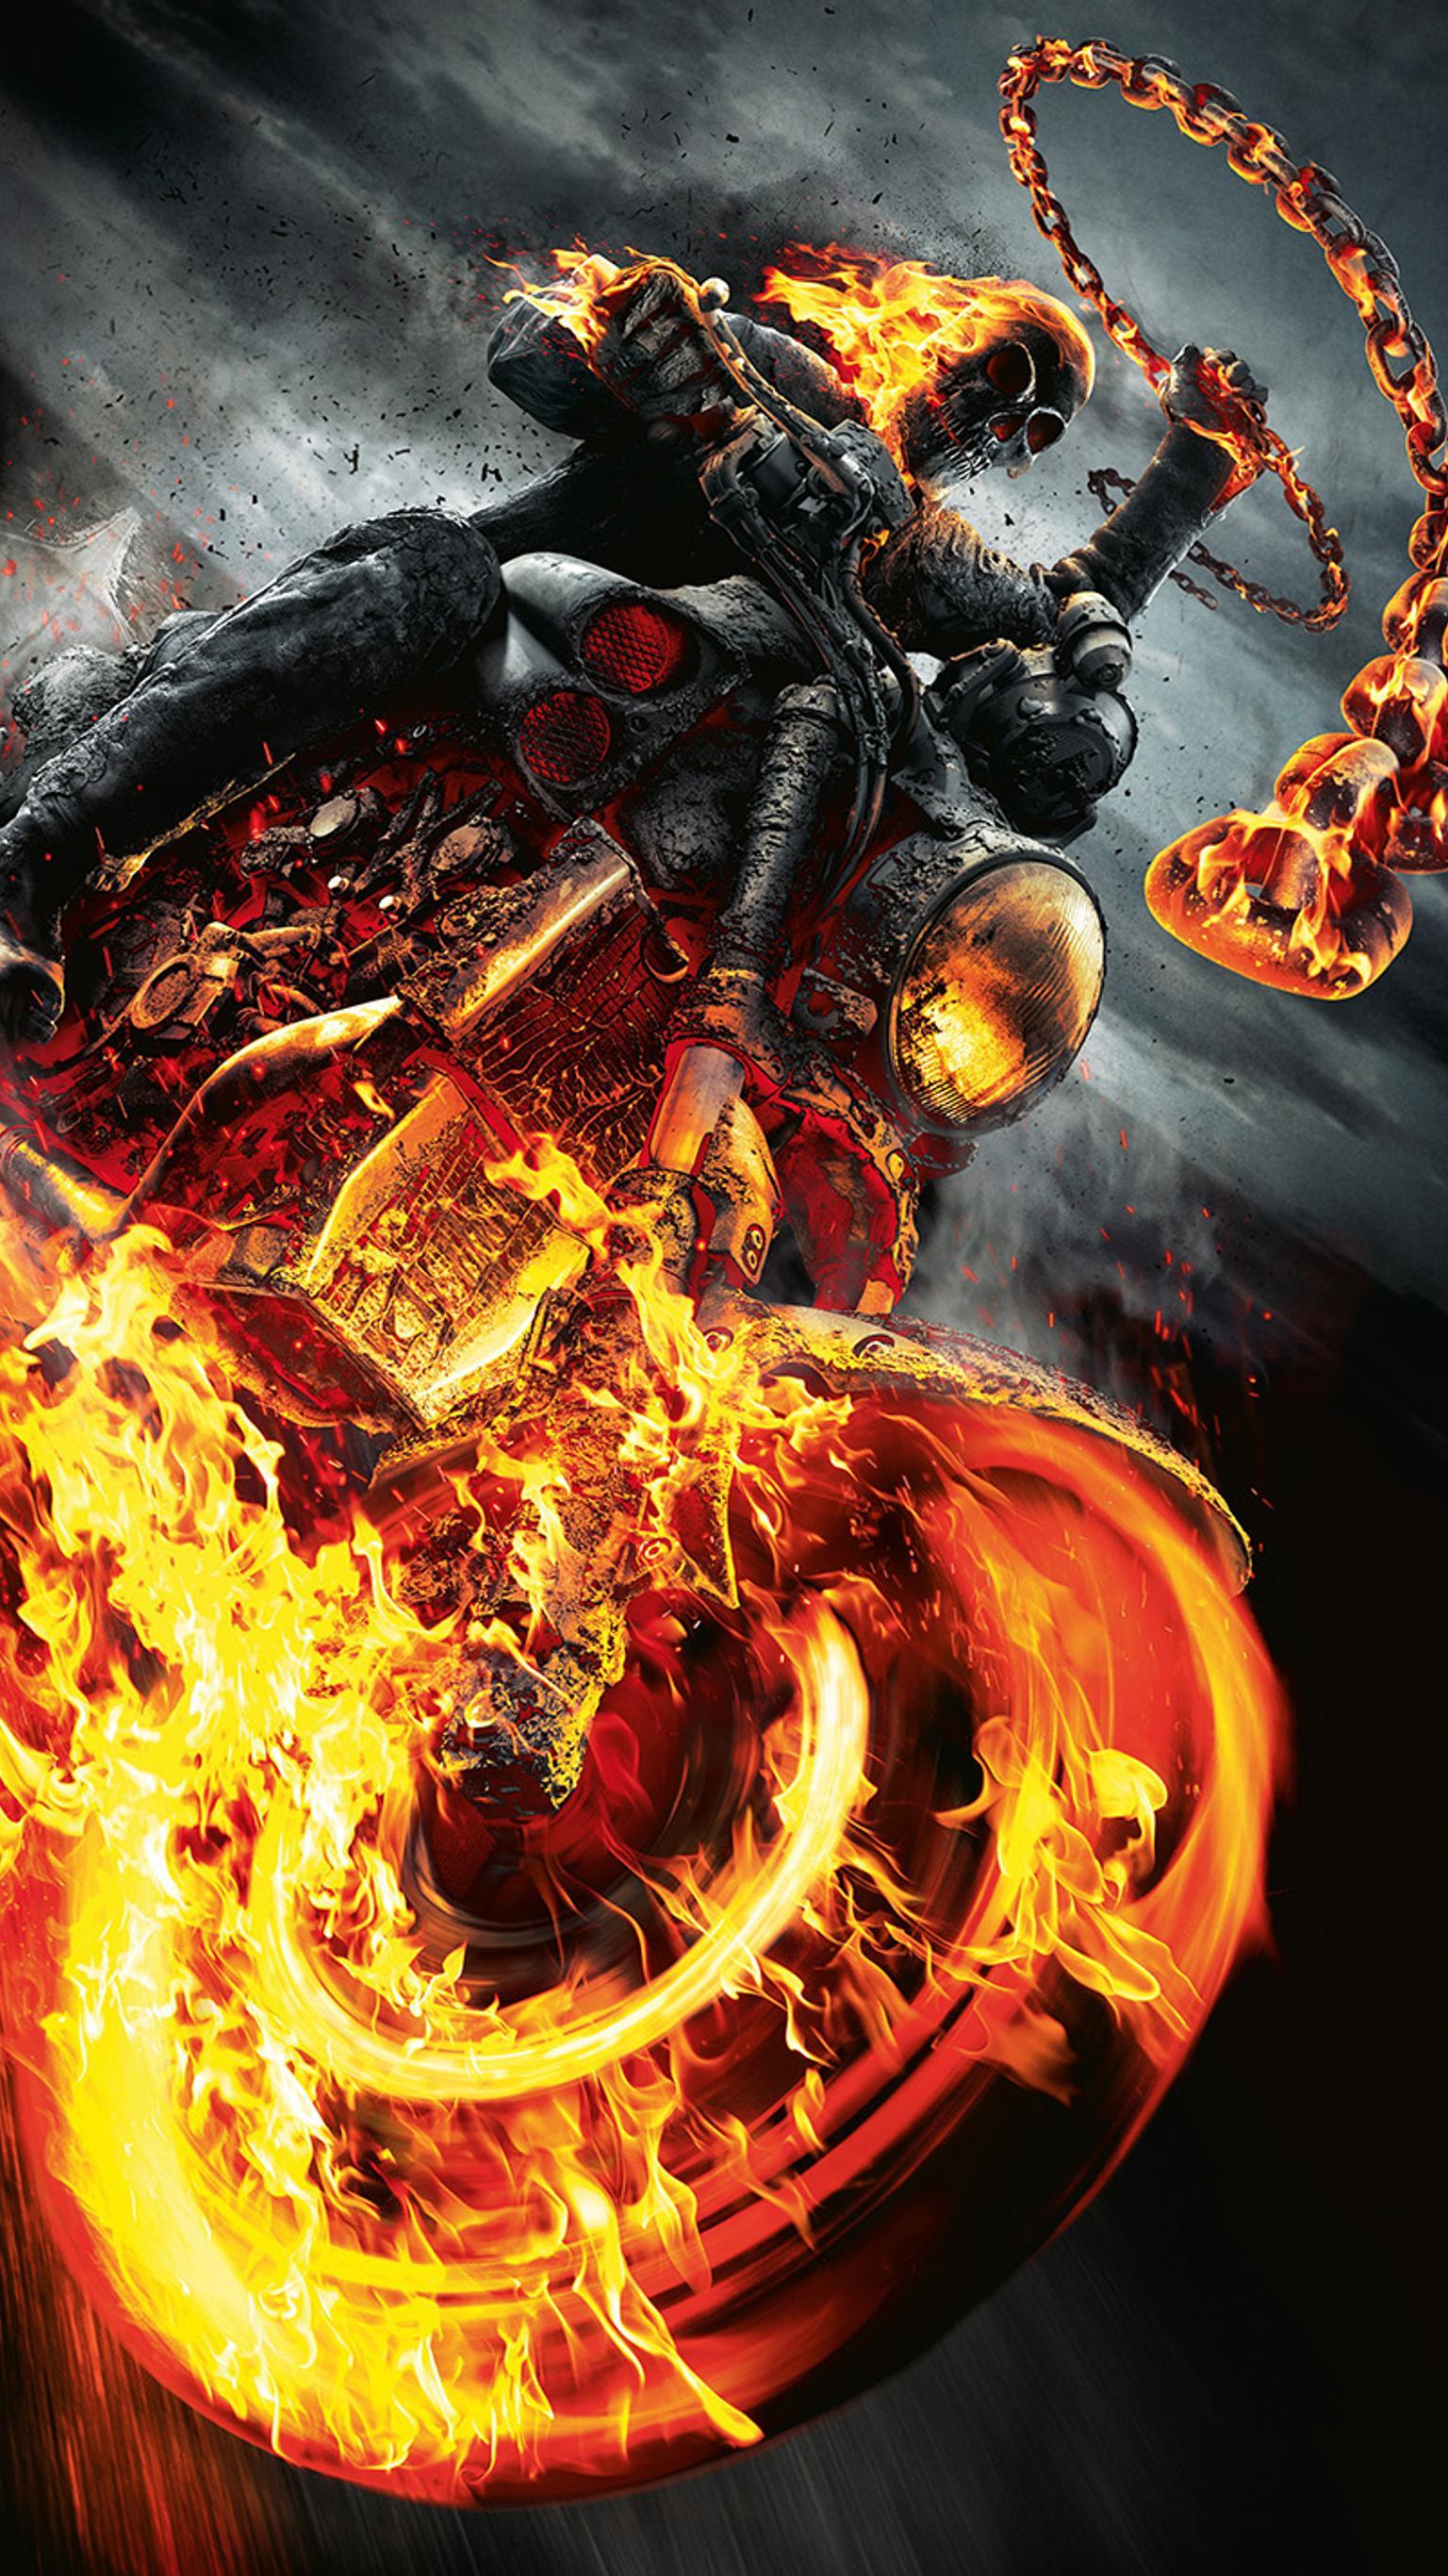 542783 1920x1080 ghost rider wallpaper for computer screen - Rare Gallery  HD Wallpapers